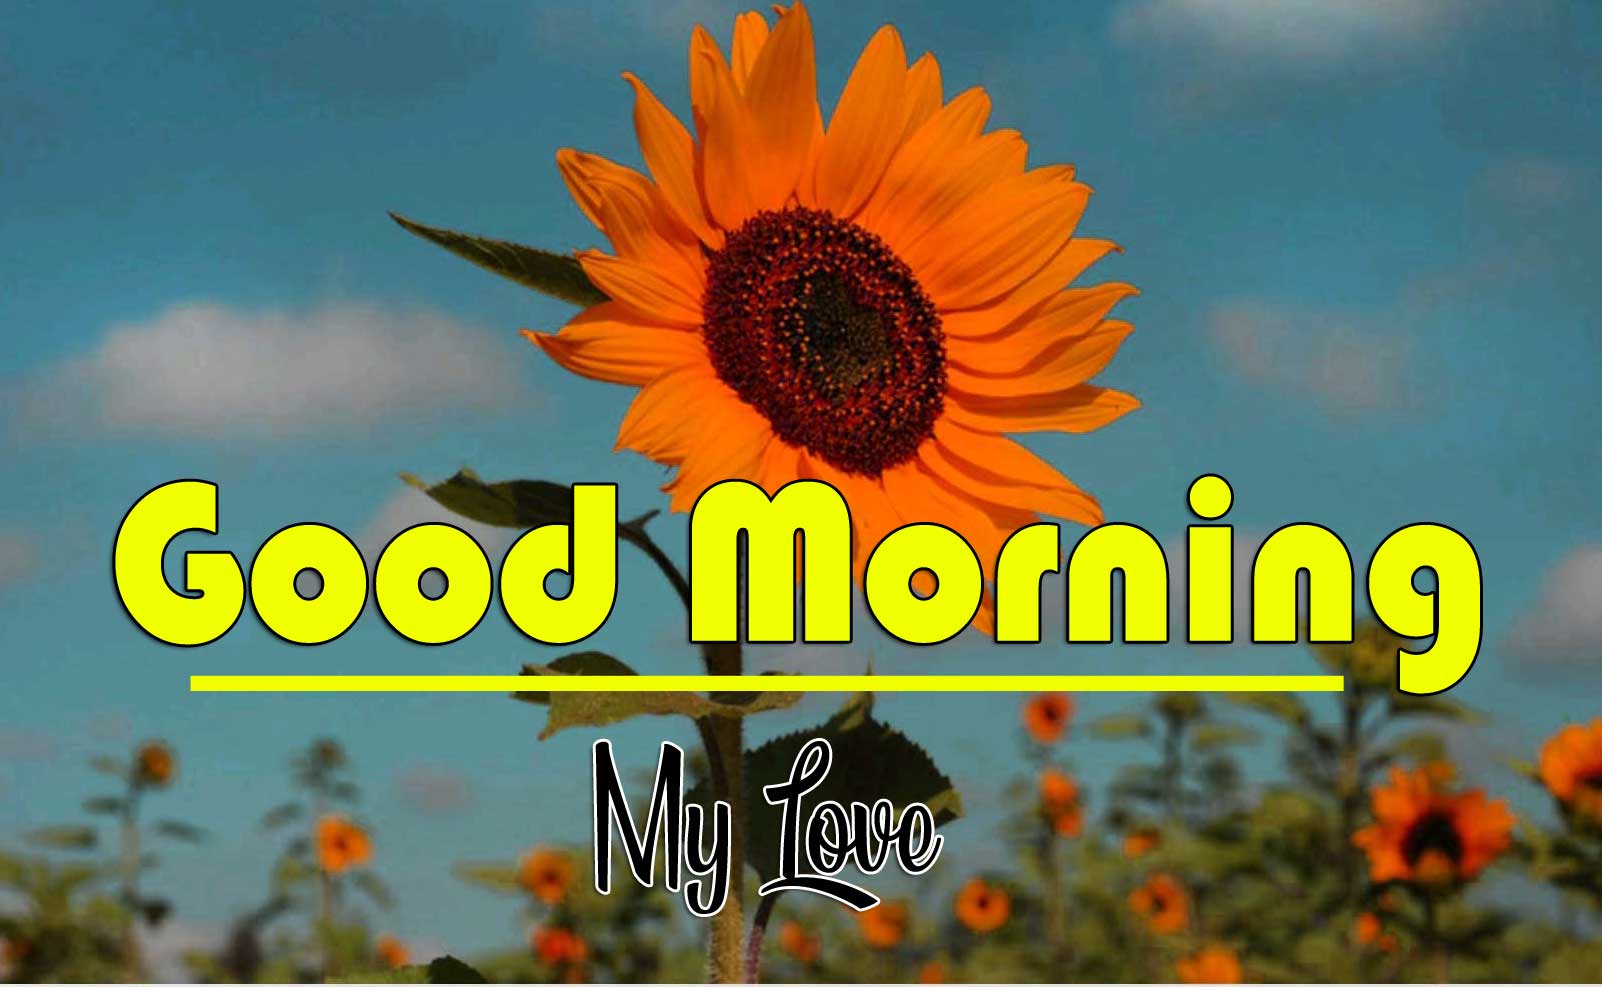 Good Morning Wishes Wallpaper Pics Download 